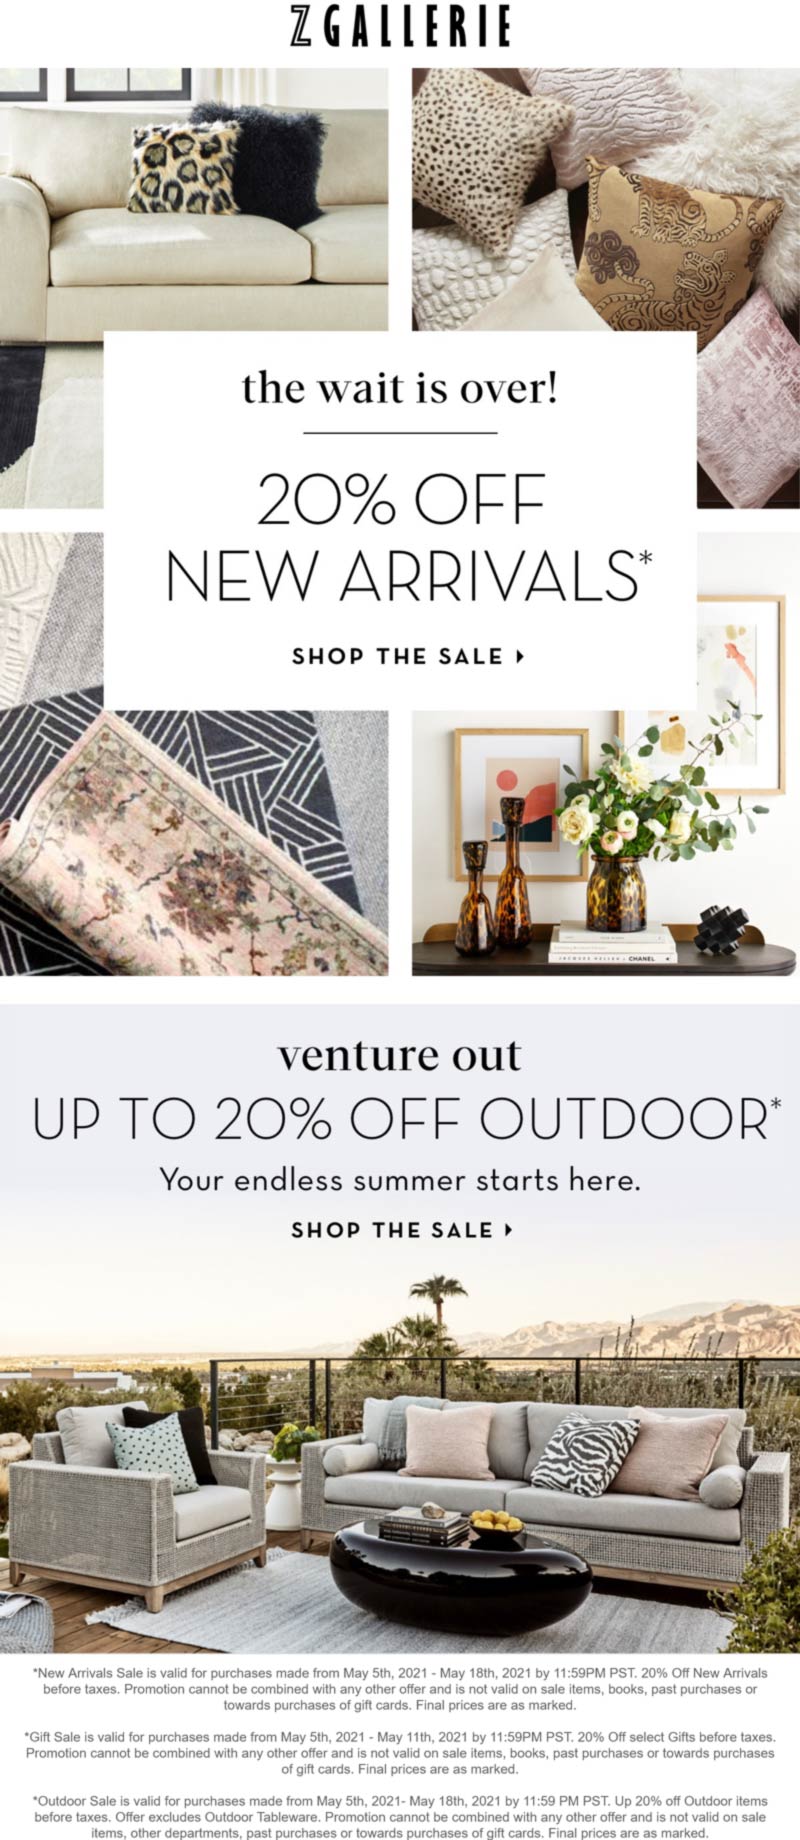 20 off new furniture arrivals at Z Gallerie zgallerie The Coupons App®